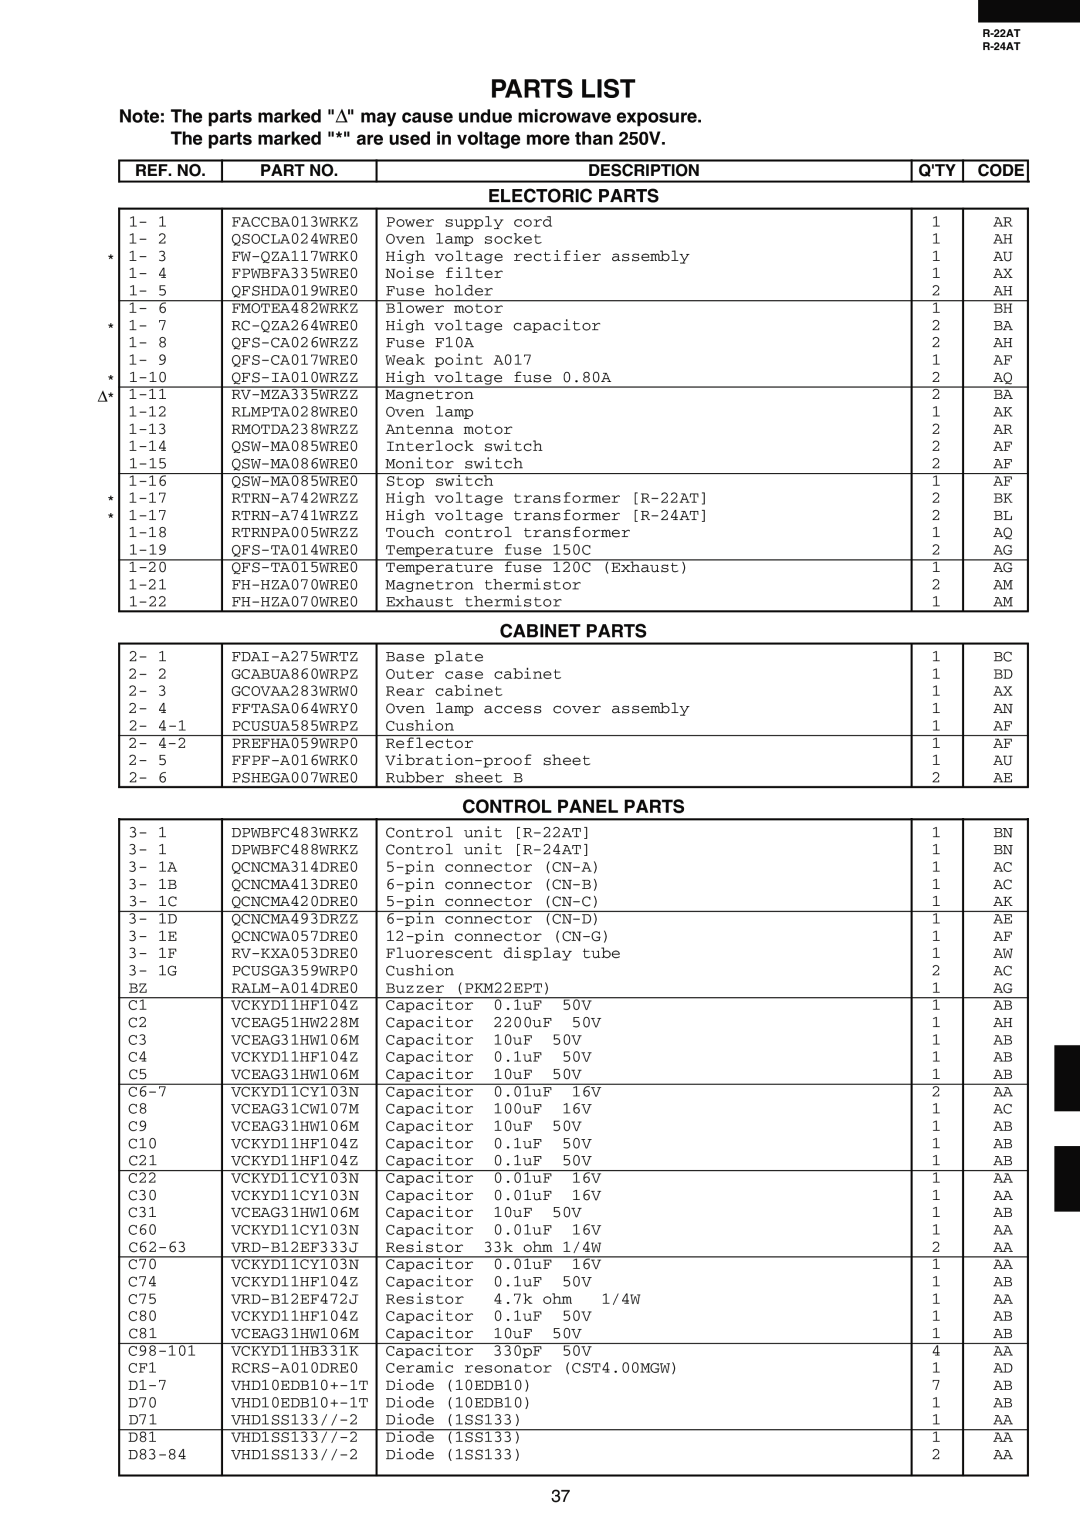 Sharp R-22AT Parts List, Note The parts marked ∆ may cause undue microwave exposure, Electoric Parts, Cabinet Parts, Code 